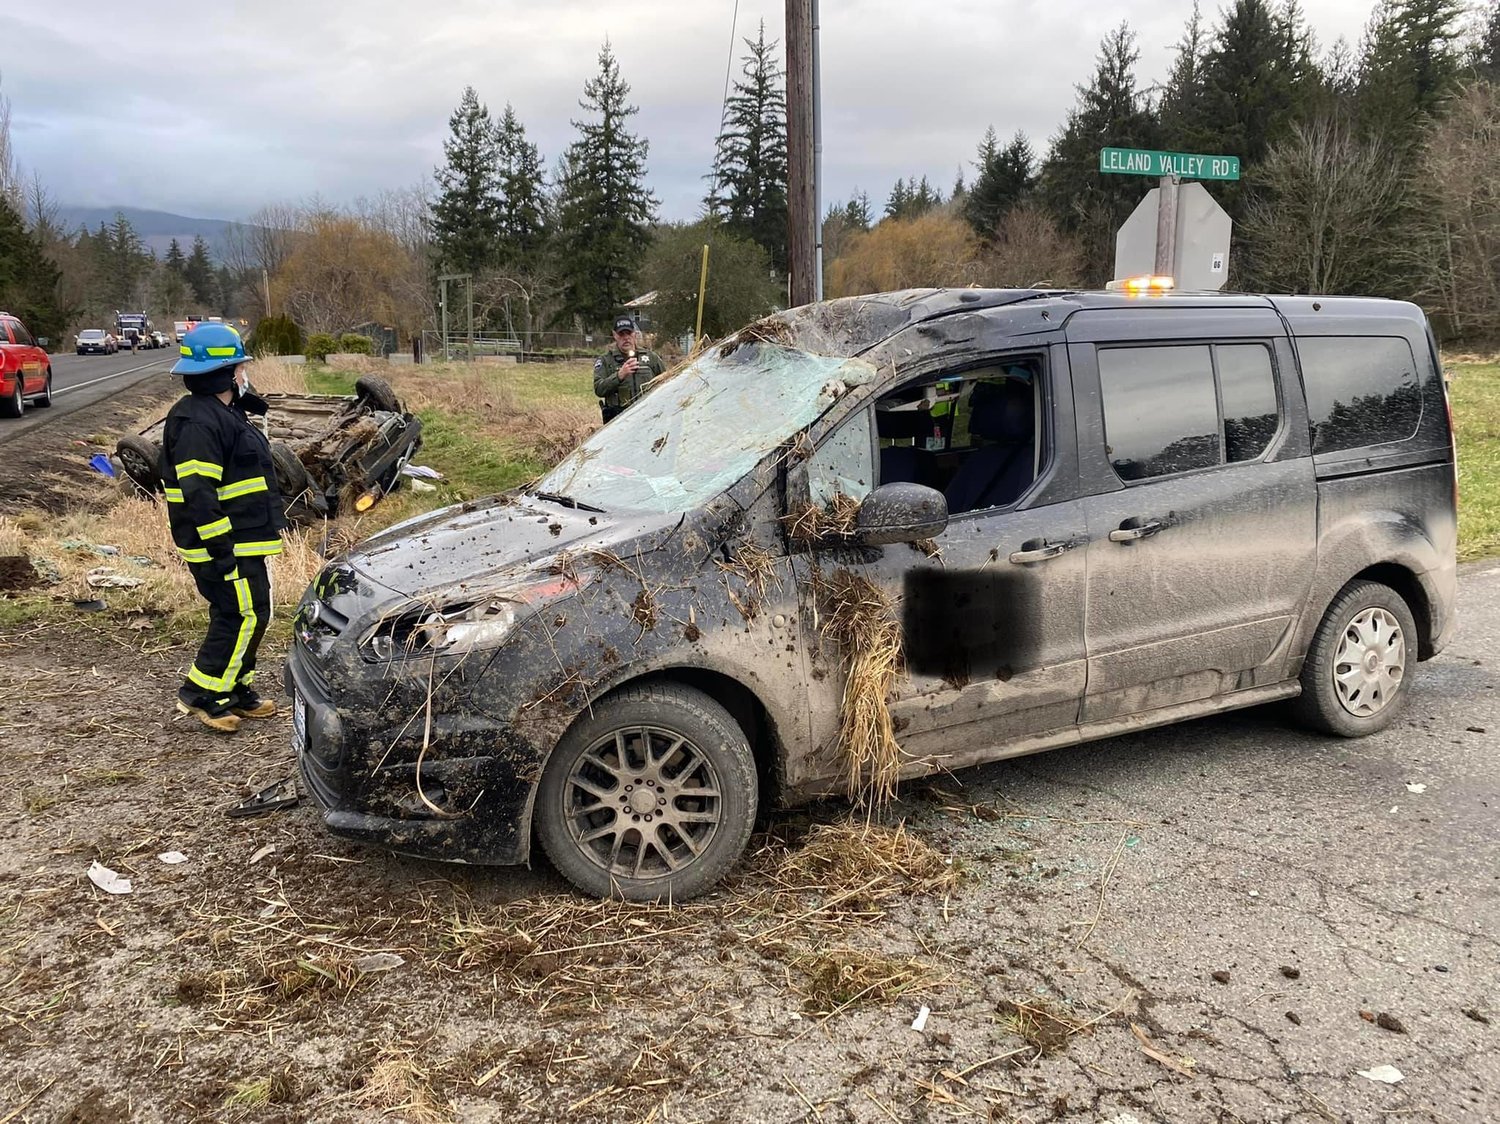 Both of the vehicles involved in a collision that occurred around 3:30 p.m. Monday, Feb. 7  at the intersection of Leland Valley Road and U.S. Highway 101 had passengers that required medevac transport.